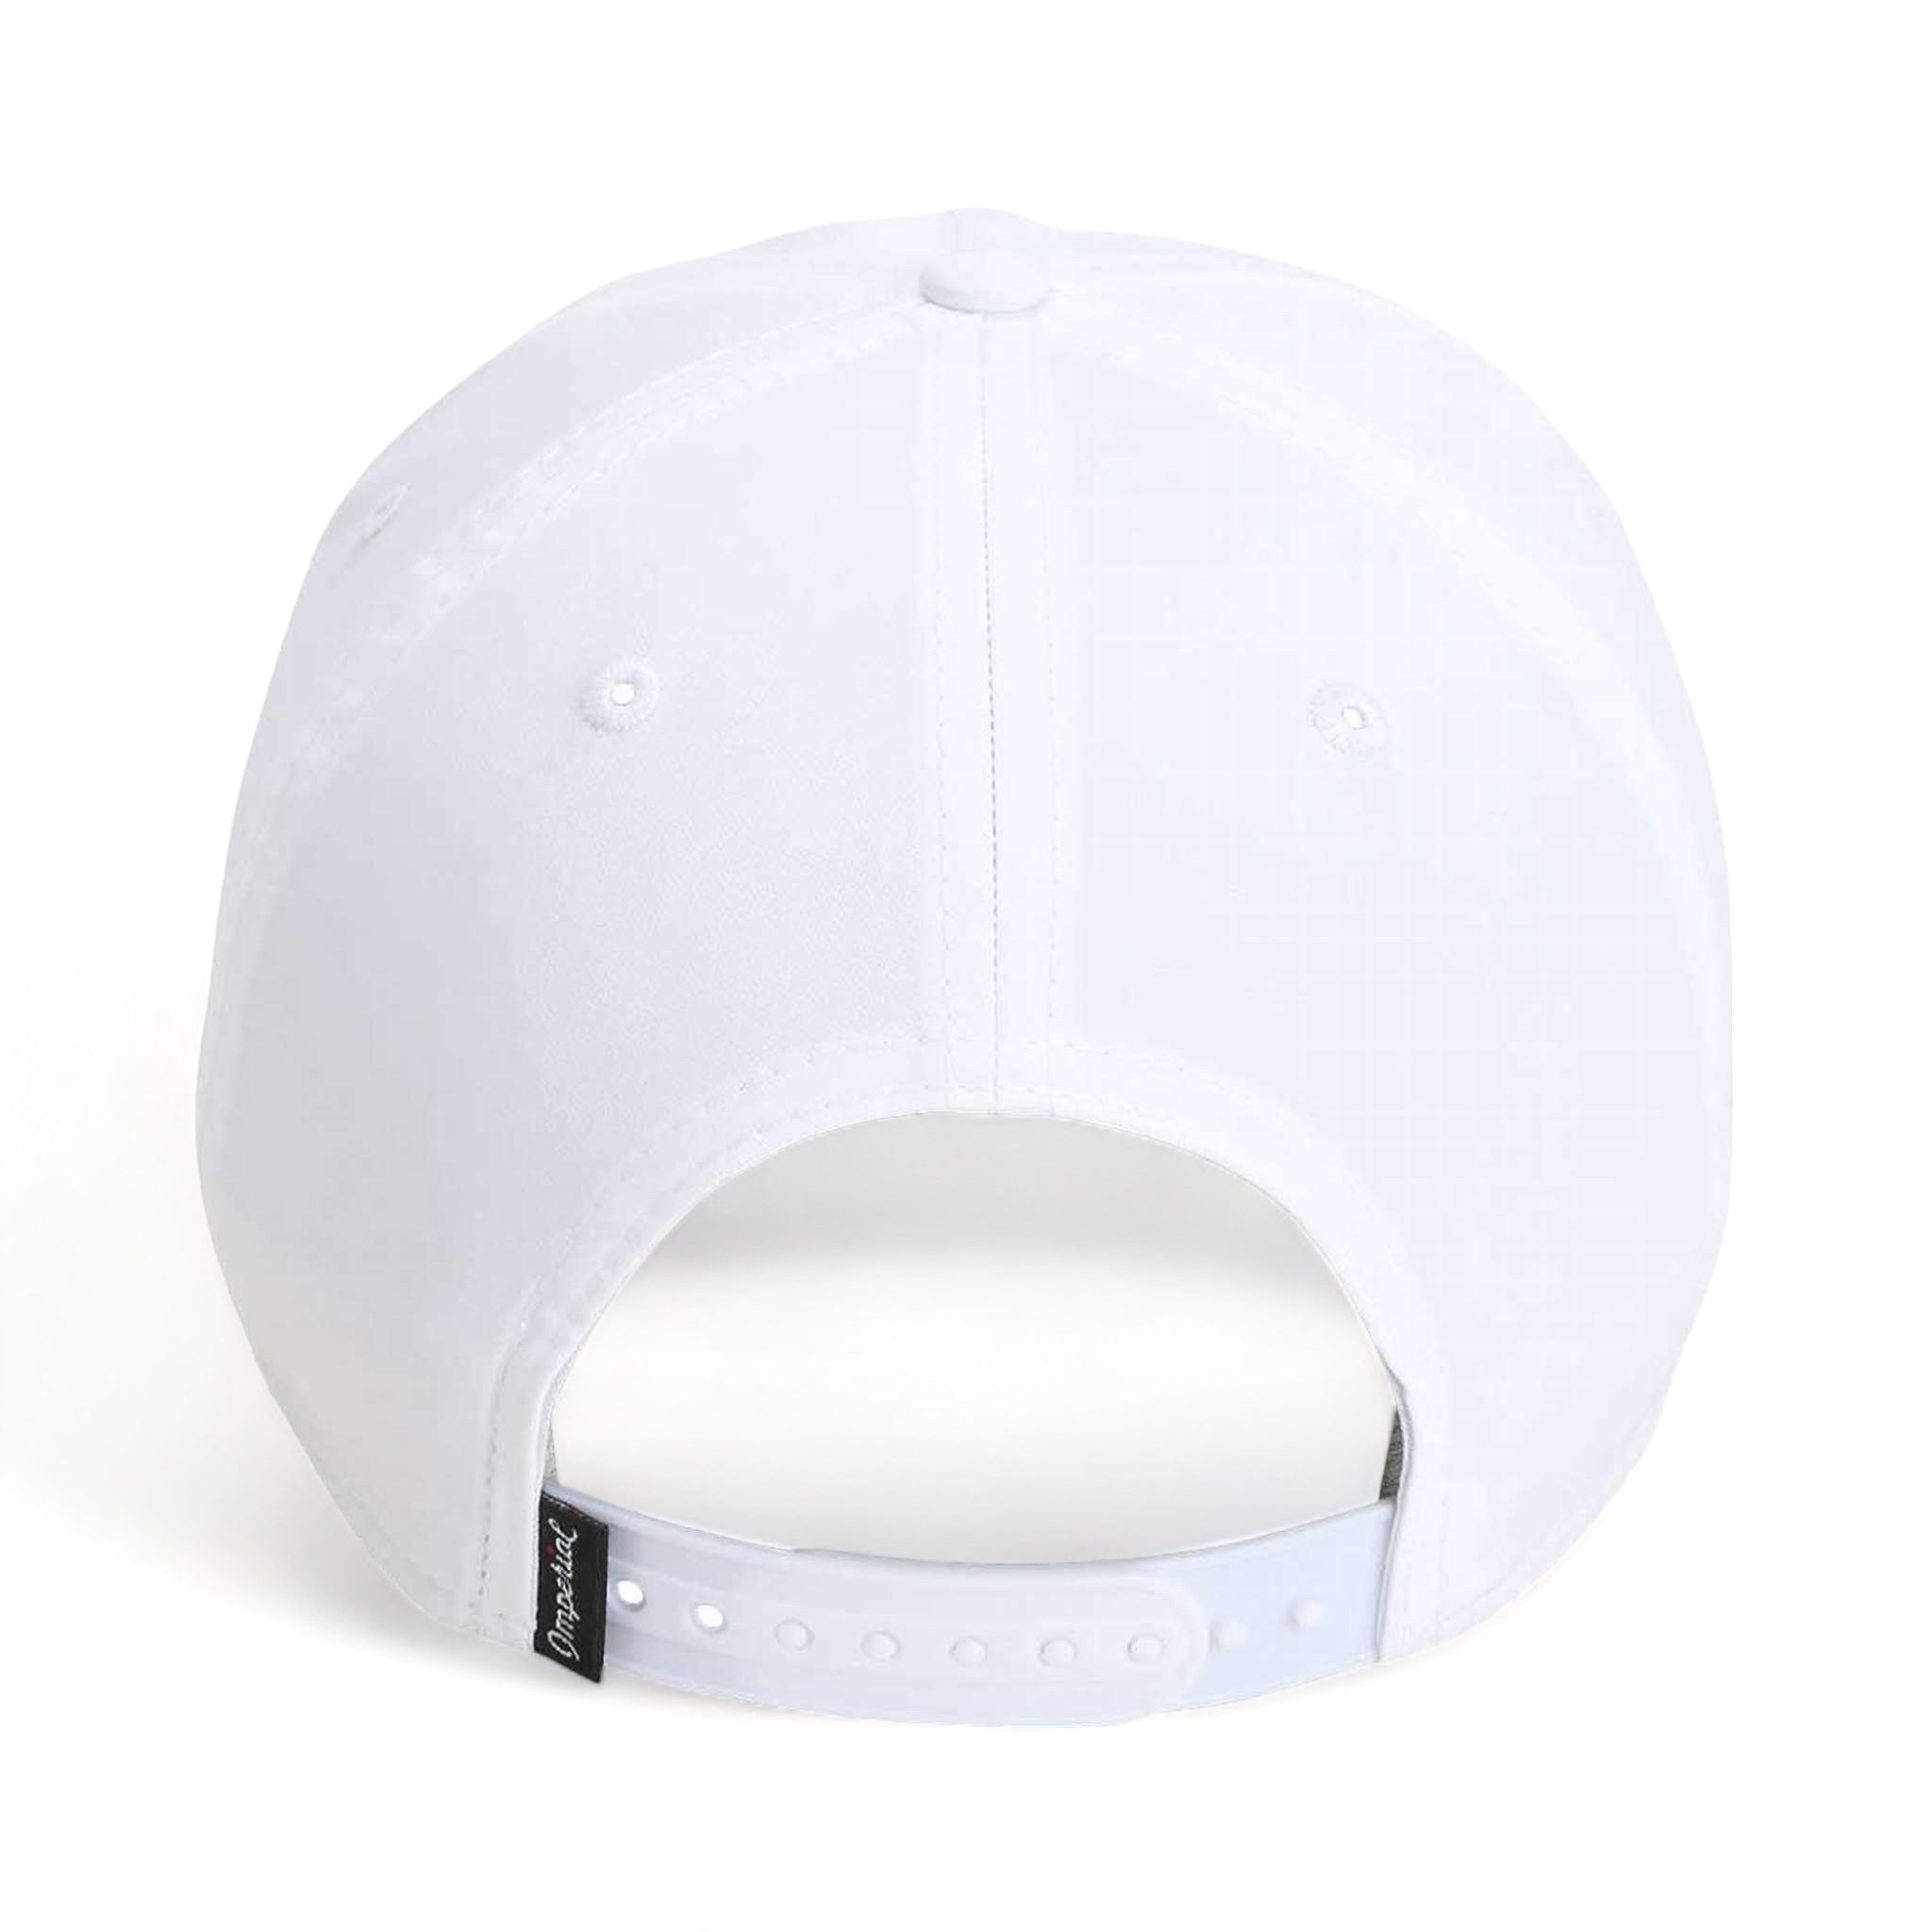 Back view of Imperial 5054 custom hat in white and green-yellow